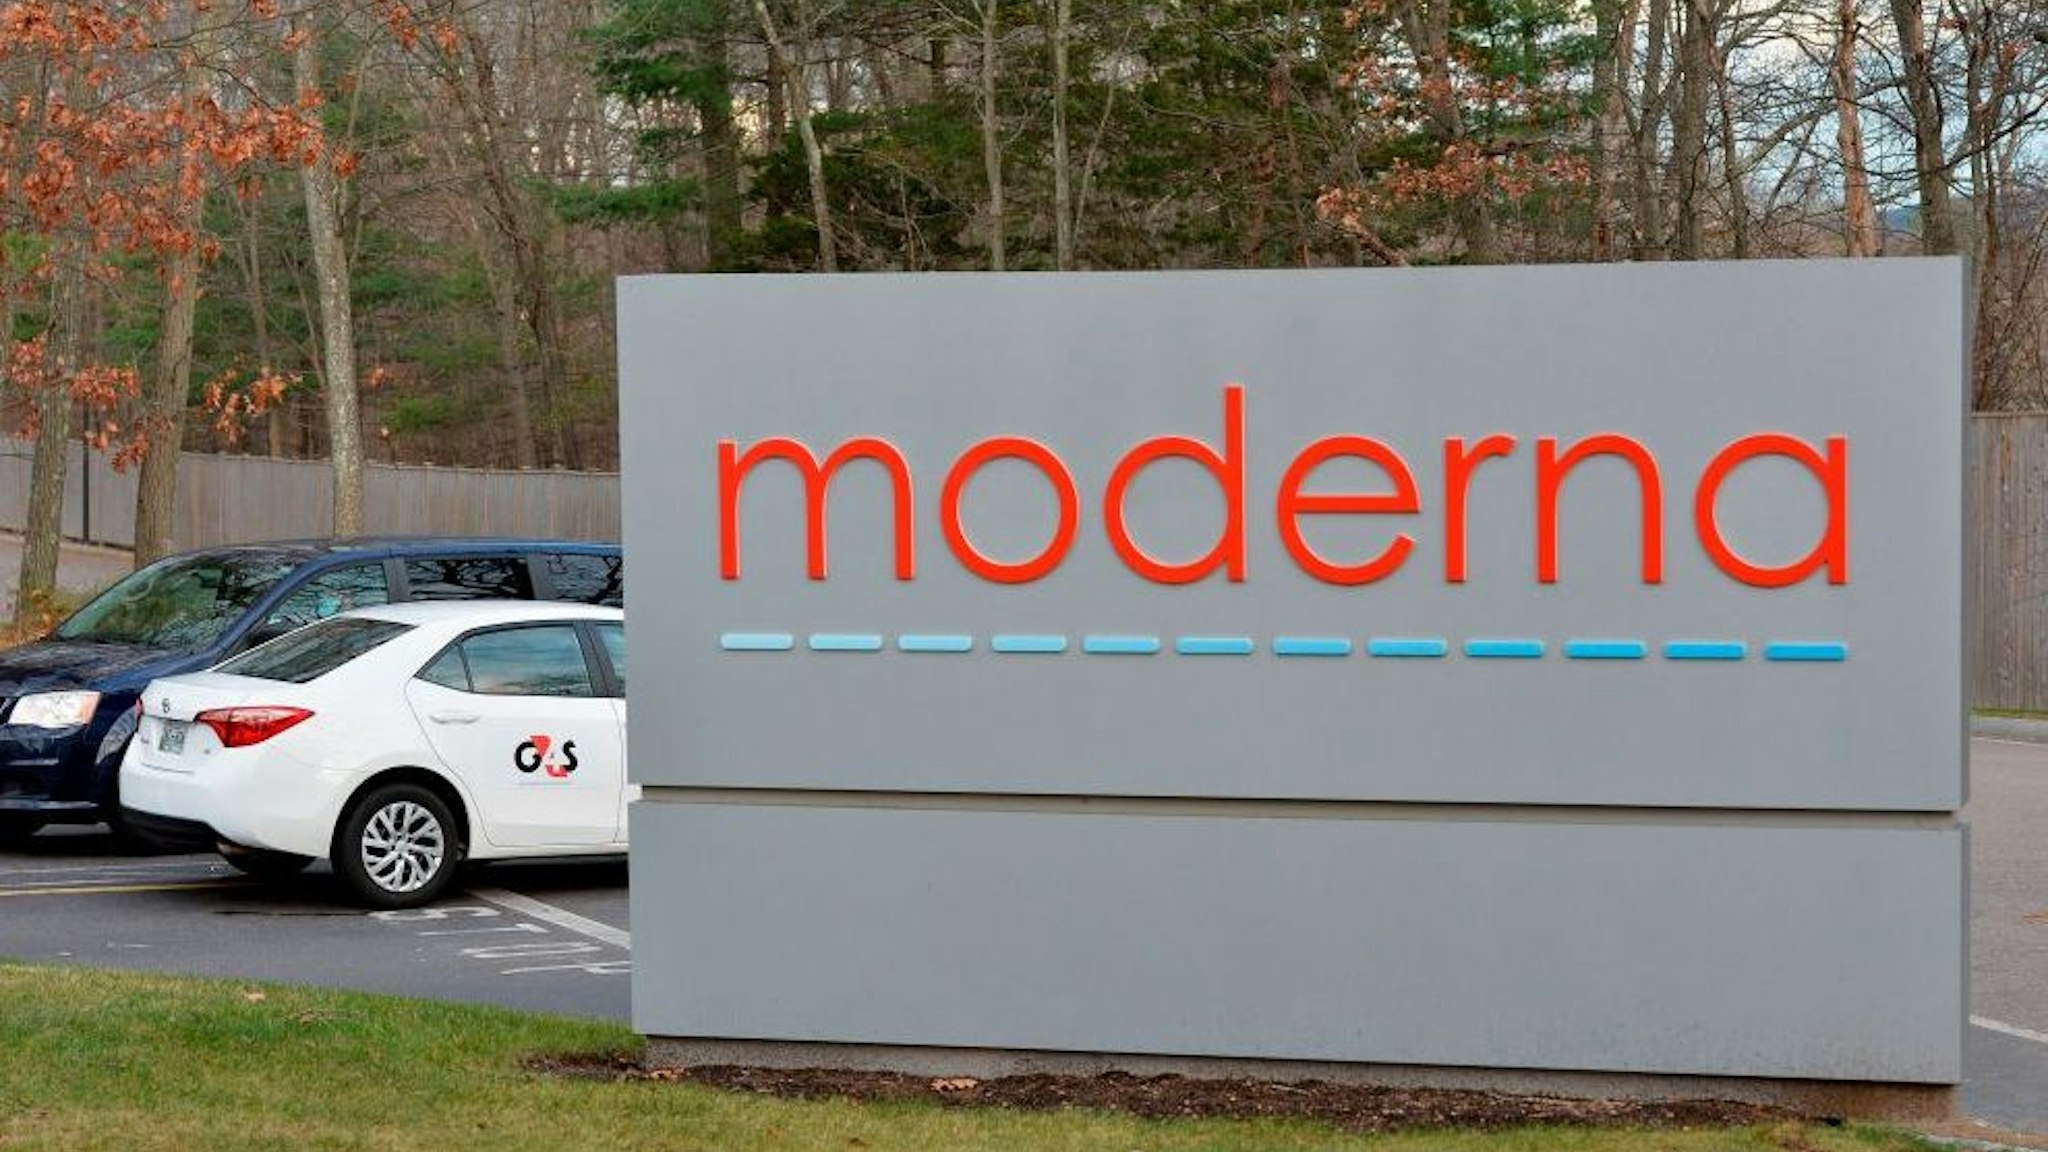 The Moderna logo is seen at the Moderna campus in Norwood, Massachusetts on on December 2, 2020, where the biotechnology company is mass producing its Covid-19 vaccine. - The US hopes to have immunized 100 million people against Covid-19 by the end of February, a top official said on December 2, which is approximately 40 percent of the country's adult population. The push should start within weeks, when vaccines developed by Pfizer-BioNTech and Moderna-NIH are expected to be approved.